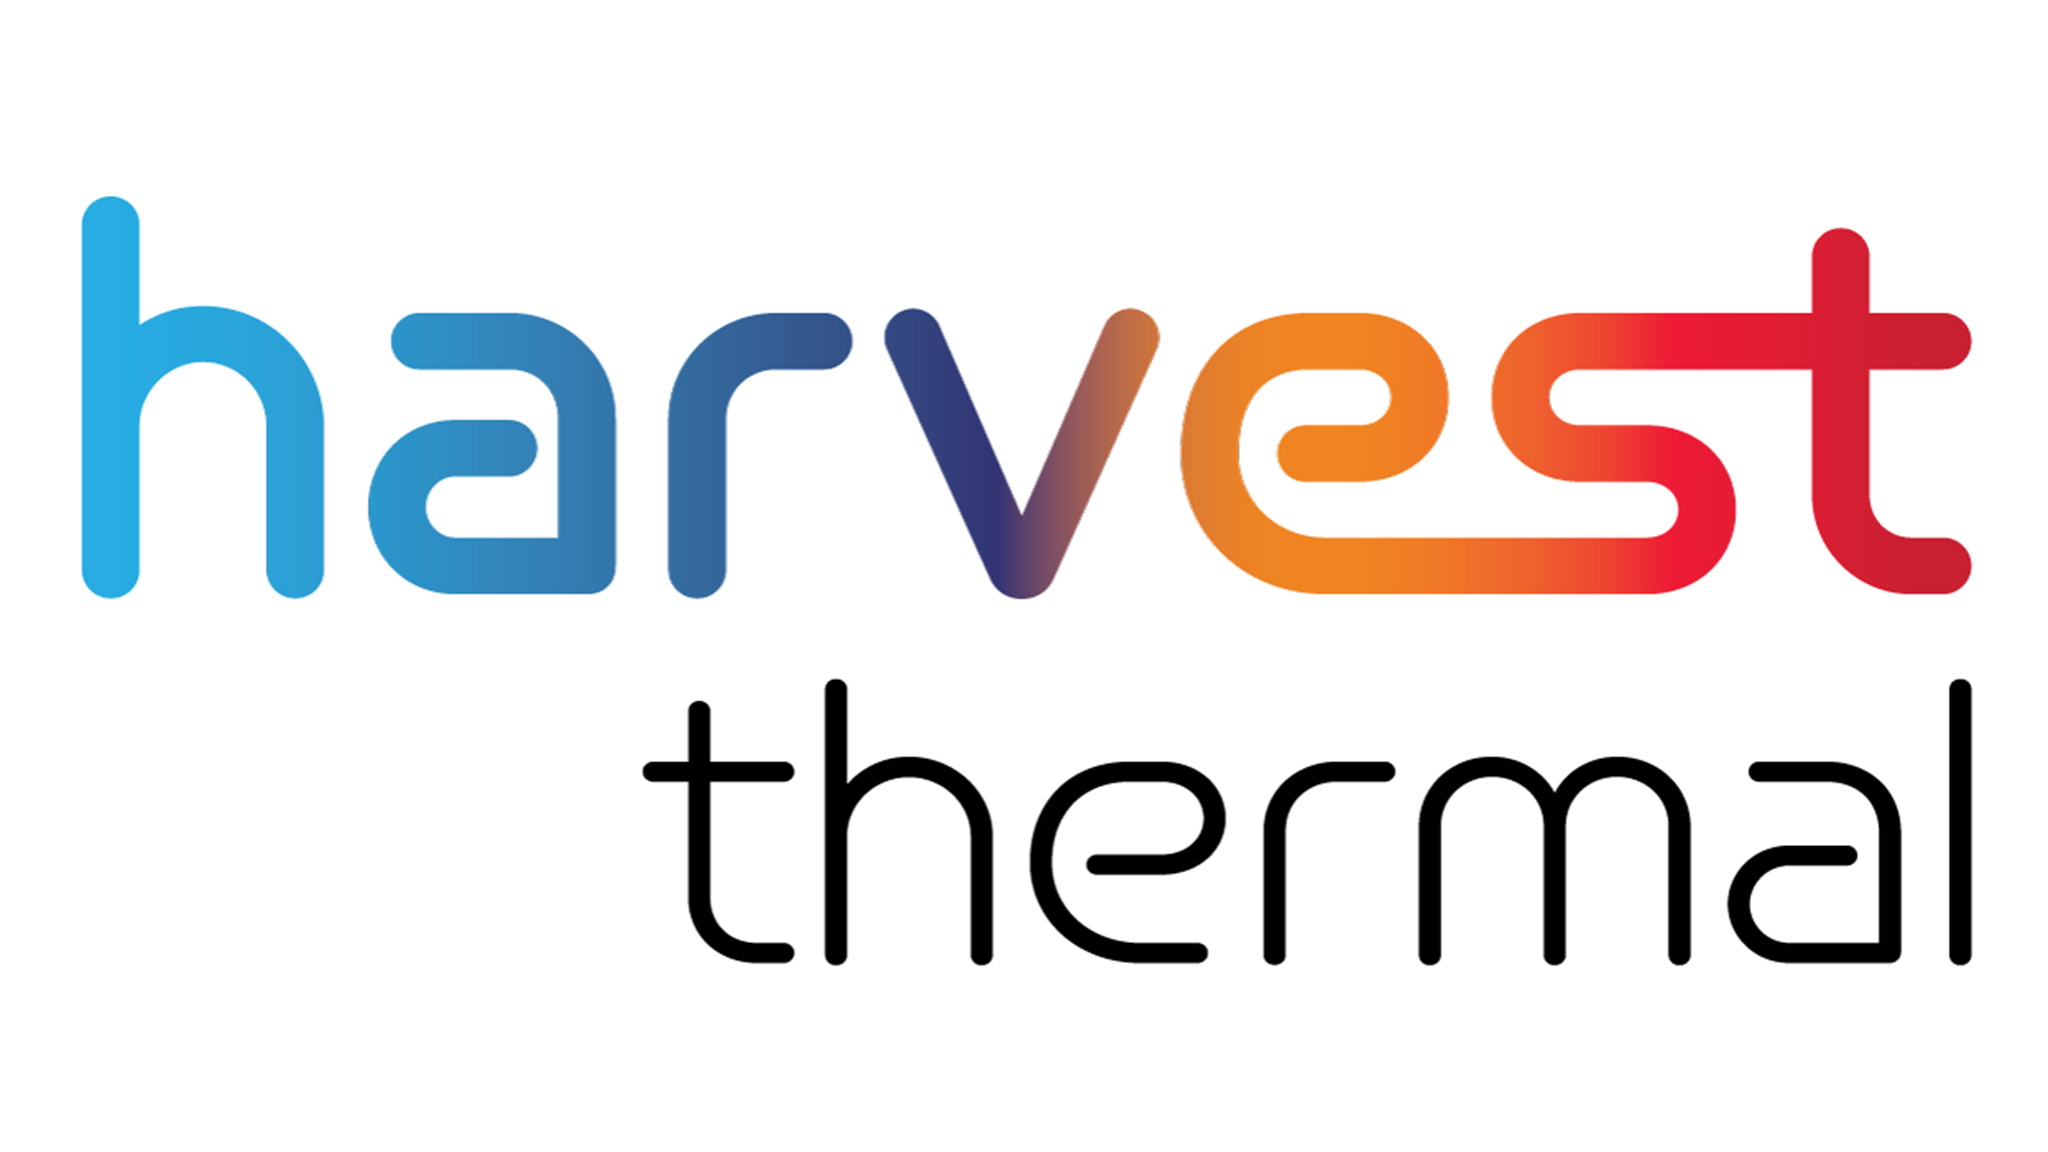 harvest-thermal-raises-4m-seed-round-to-optimize-heat-pump-efficiency